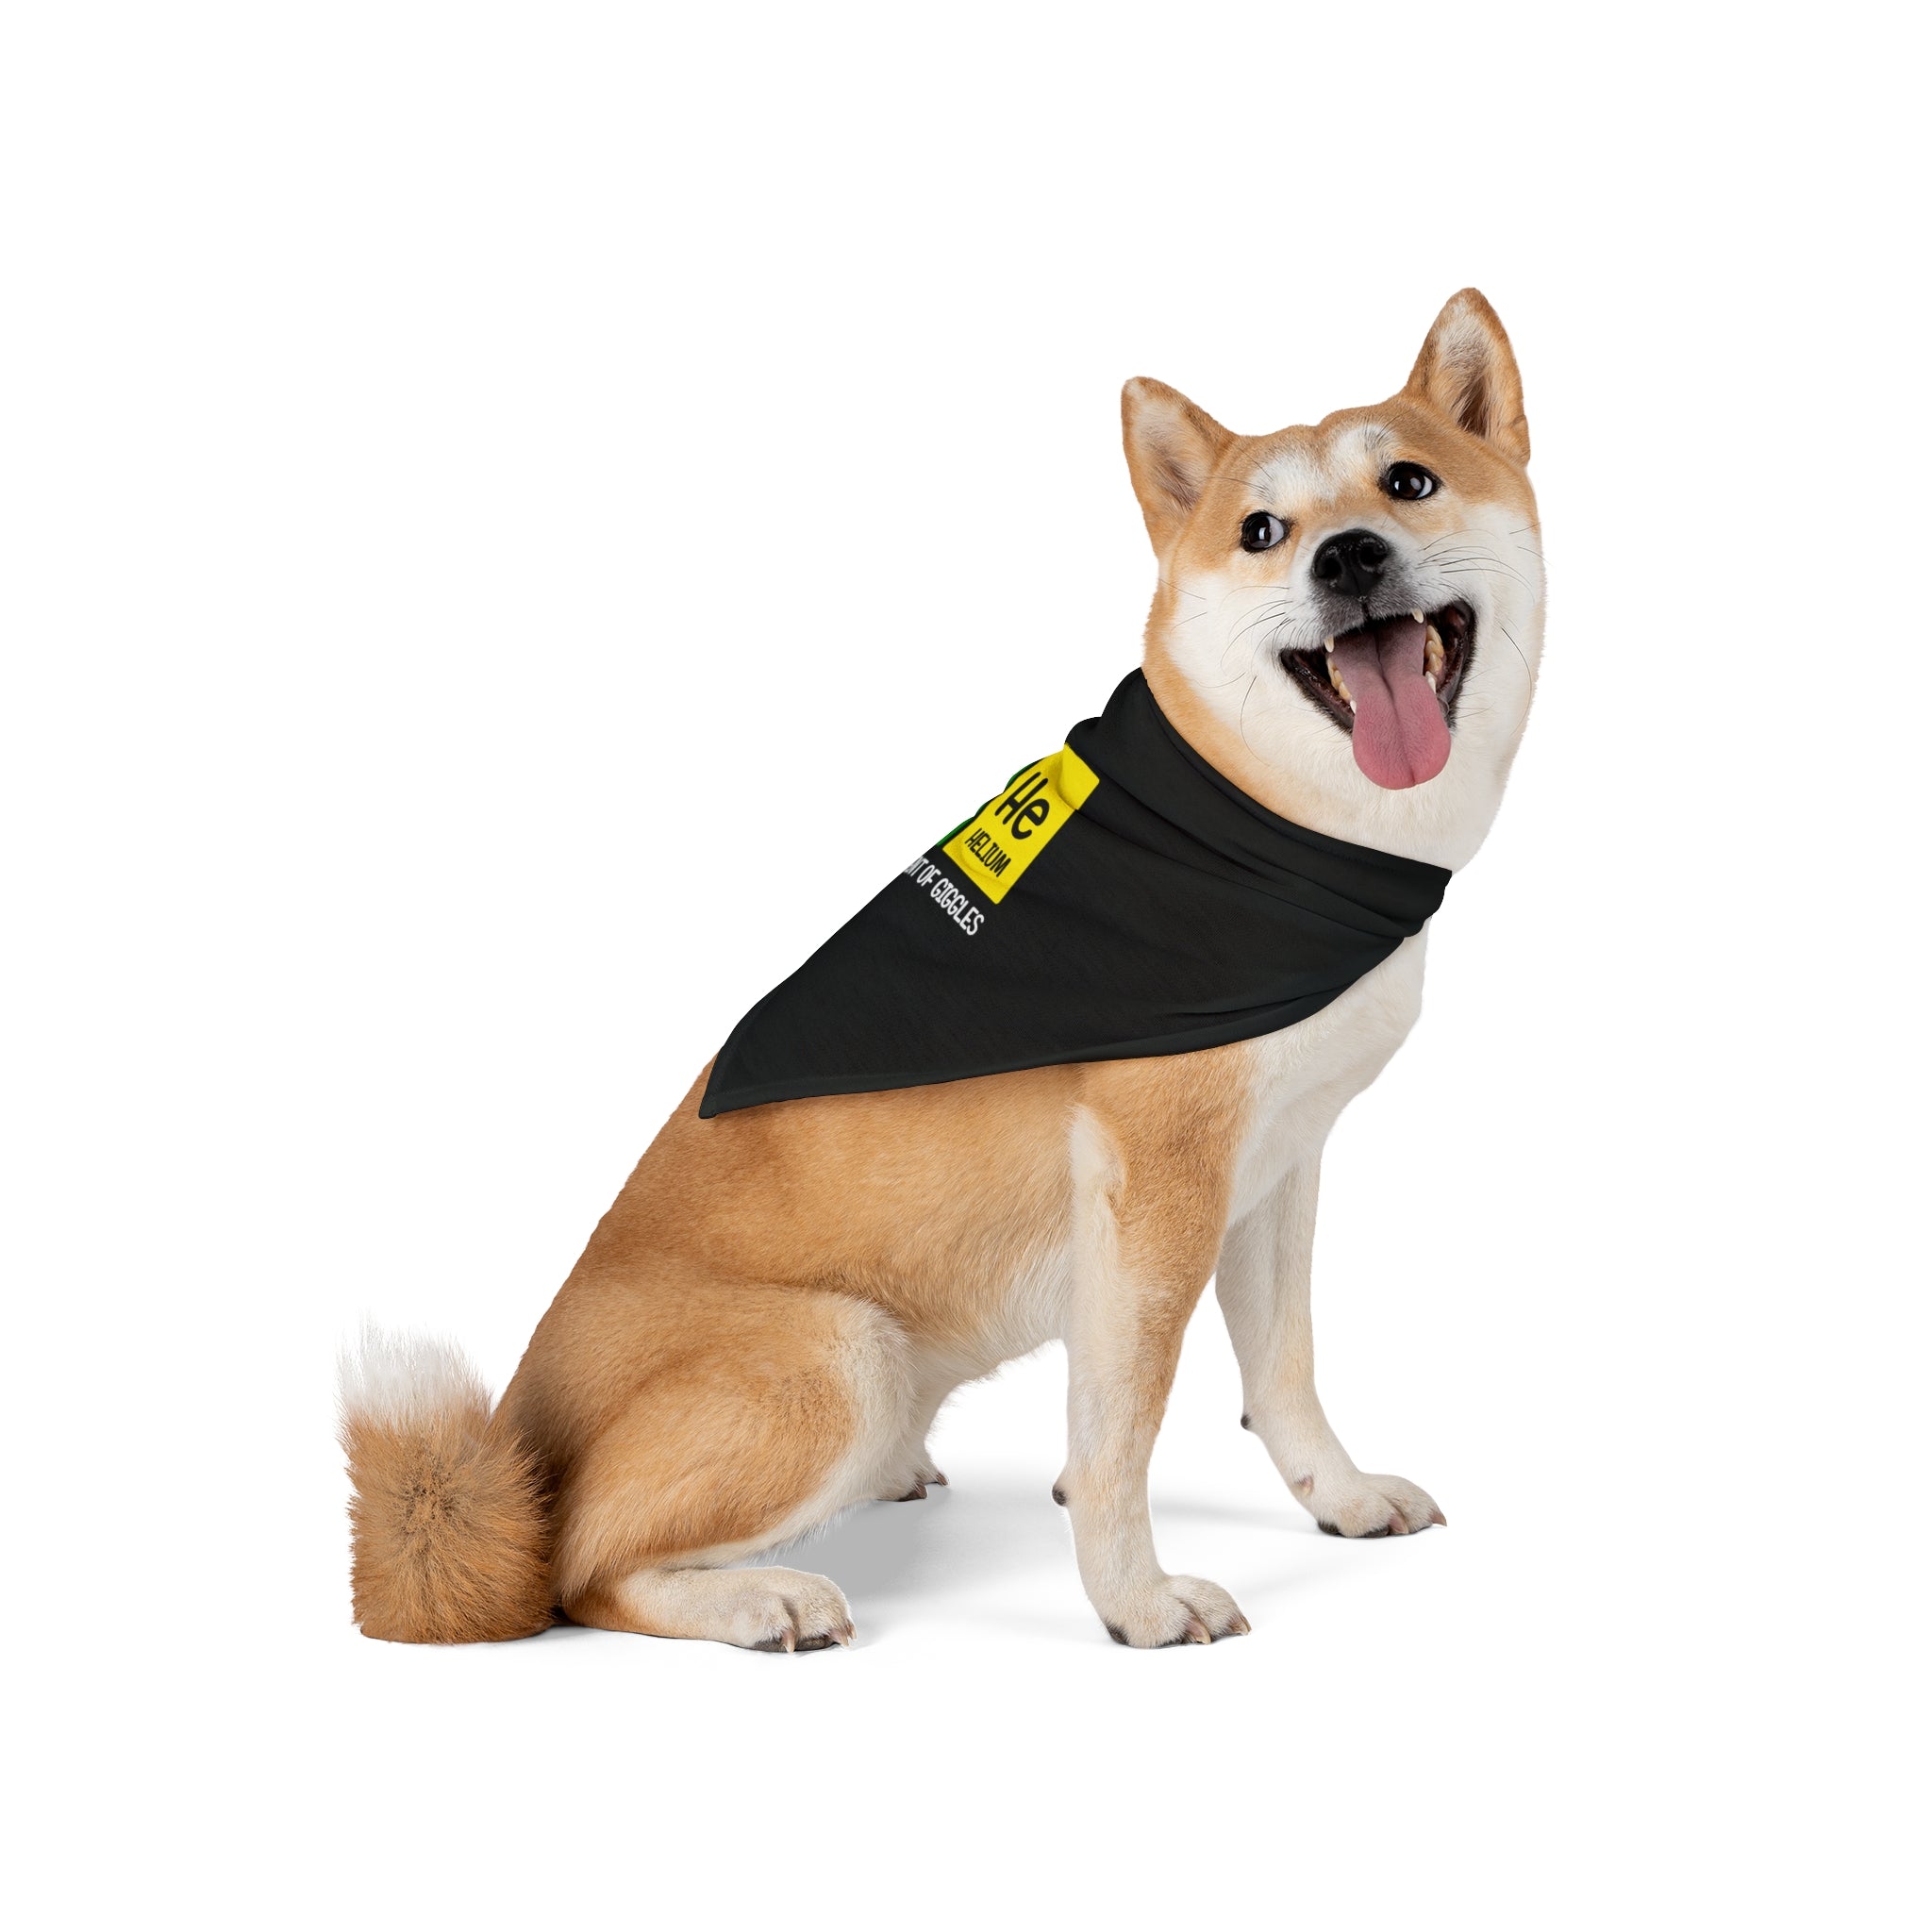 A Shiba Inu sits wearing a He-He - Pet Bandana made of soft-spun polyester with a yellow "rescued" label on a plain white background.